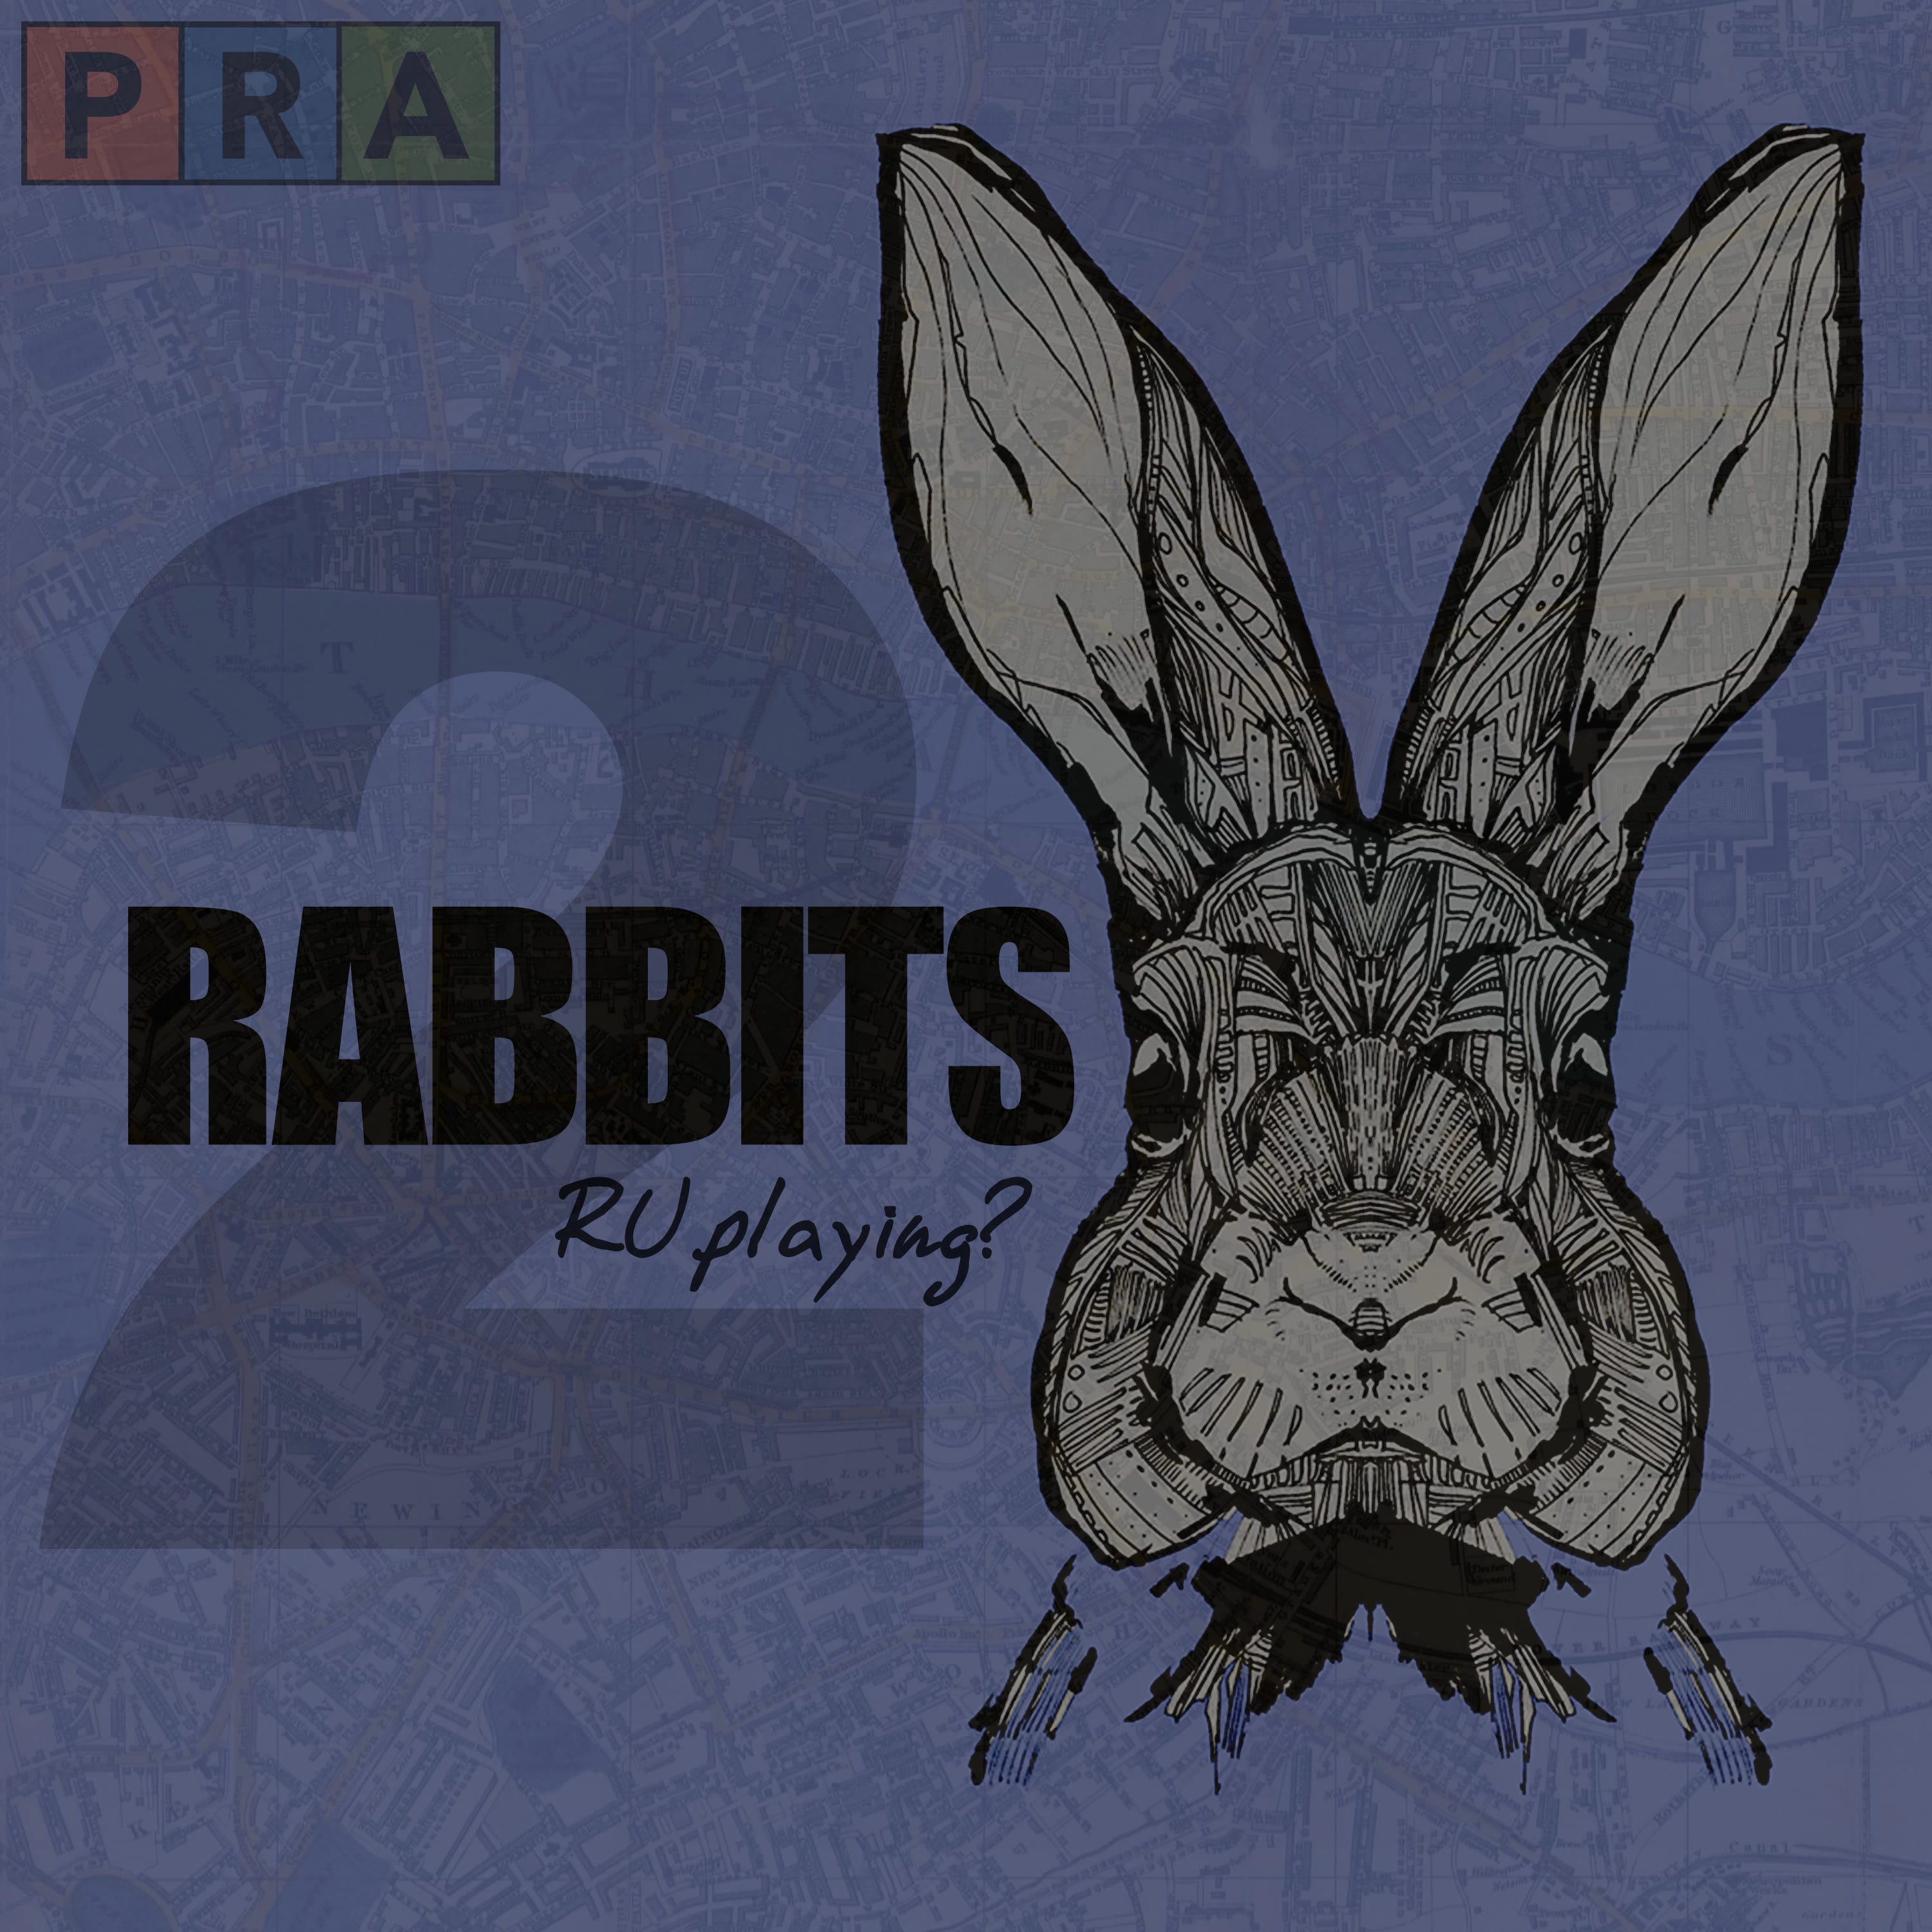 On Rabbits and Finding